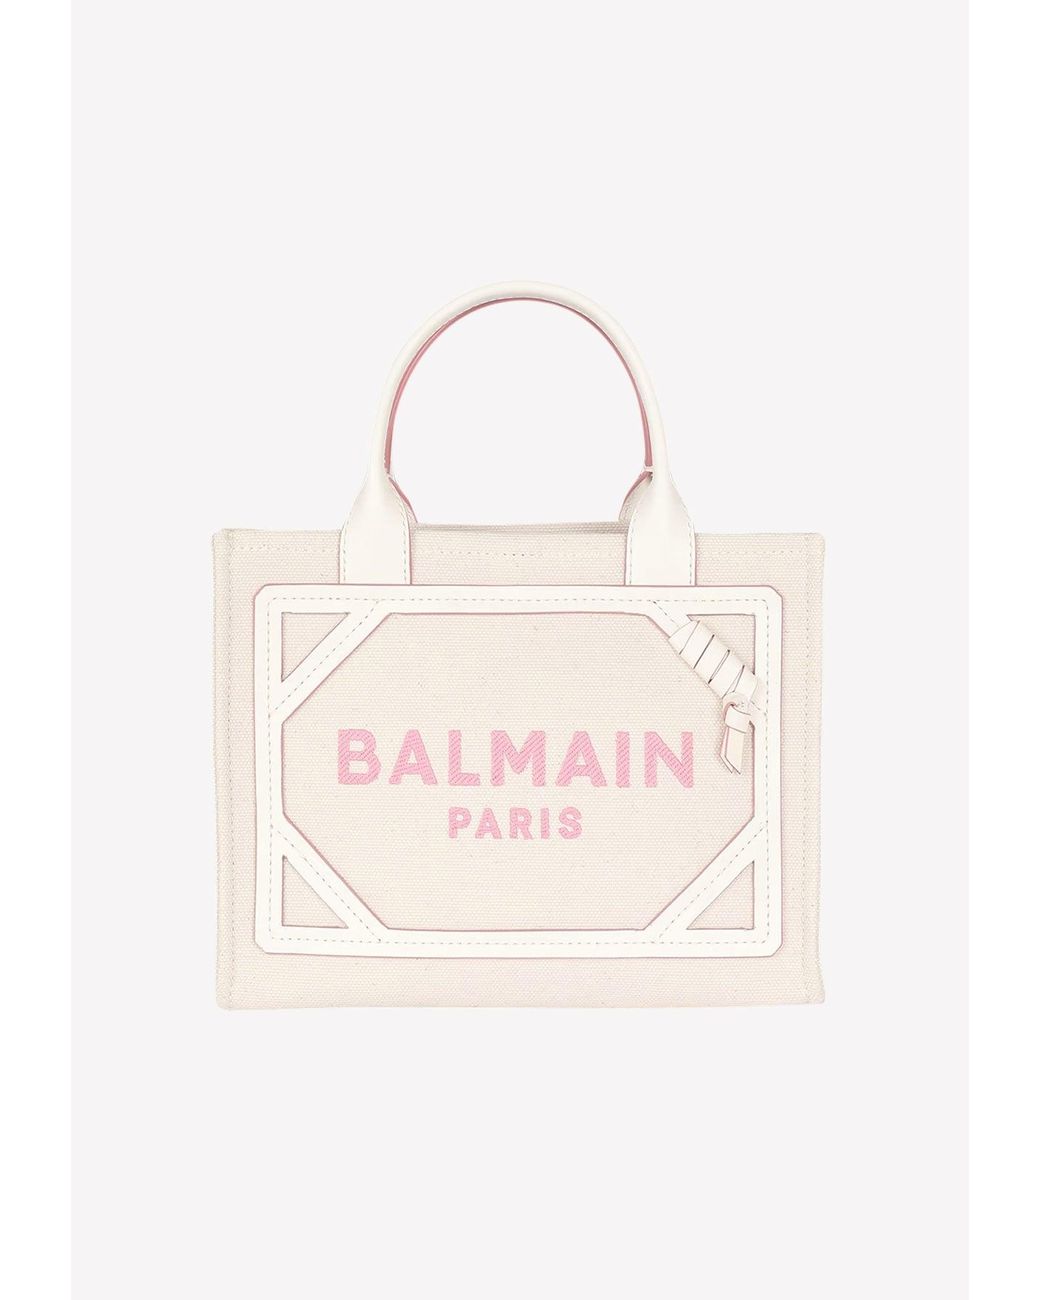 Balmain B-army Canvas Tote Bag in Pink | Lyst